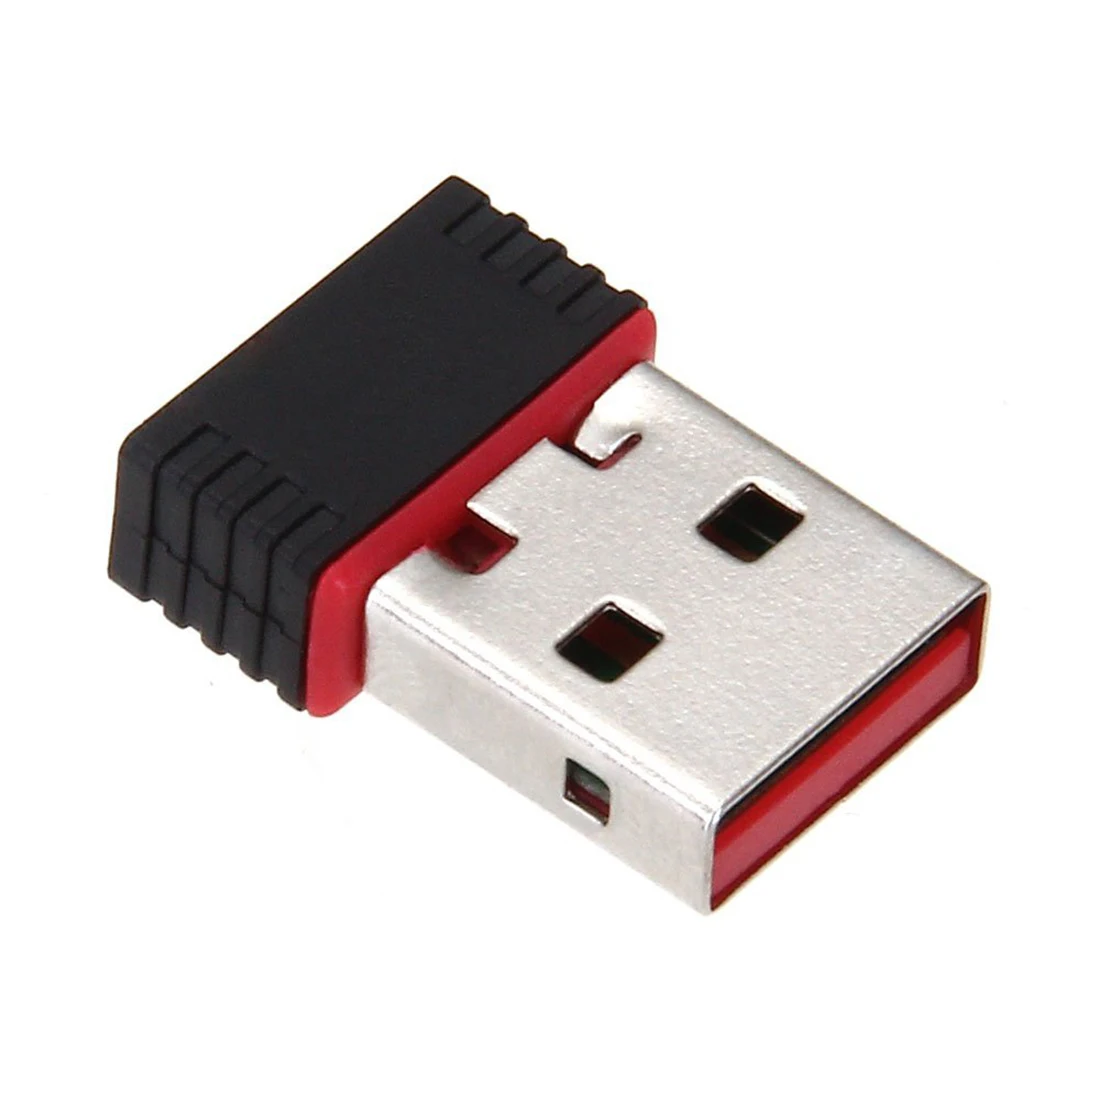 802.11 b/g/n 150mbps wireless usb adapter for mac